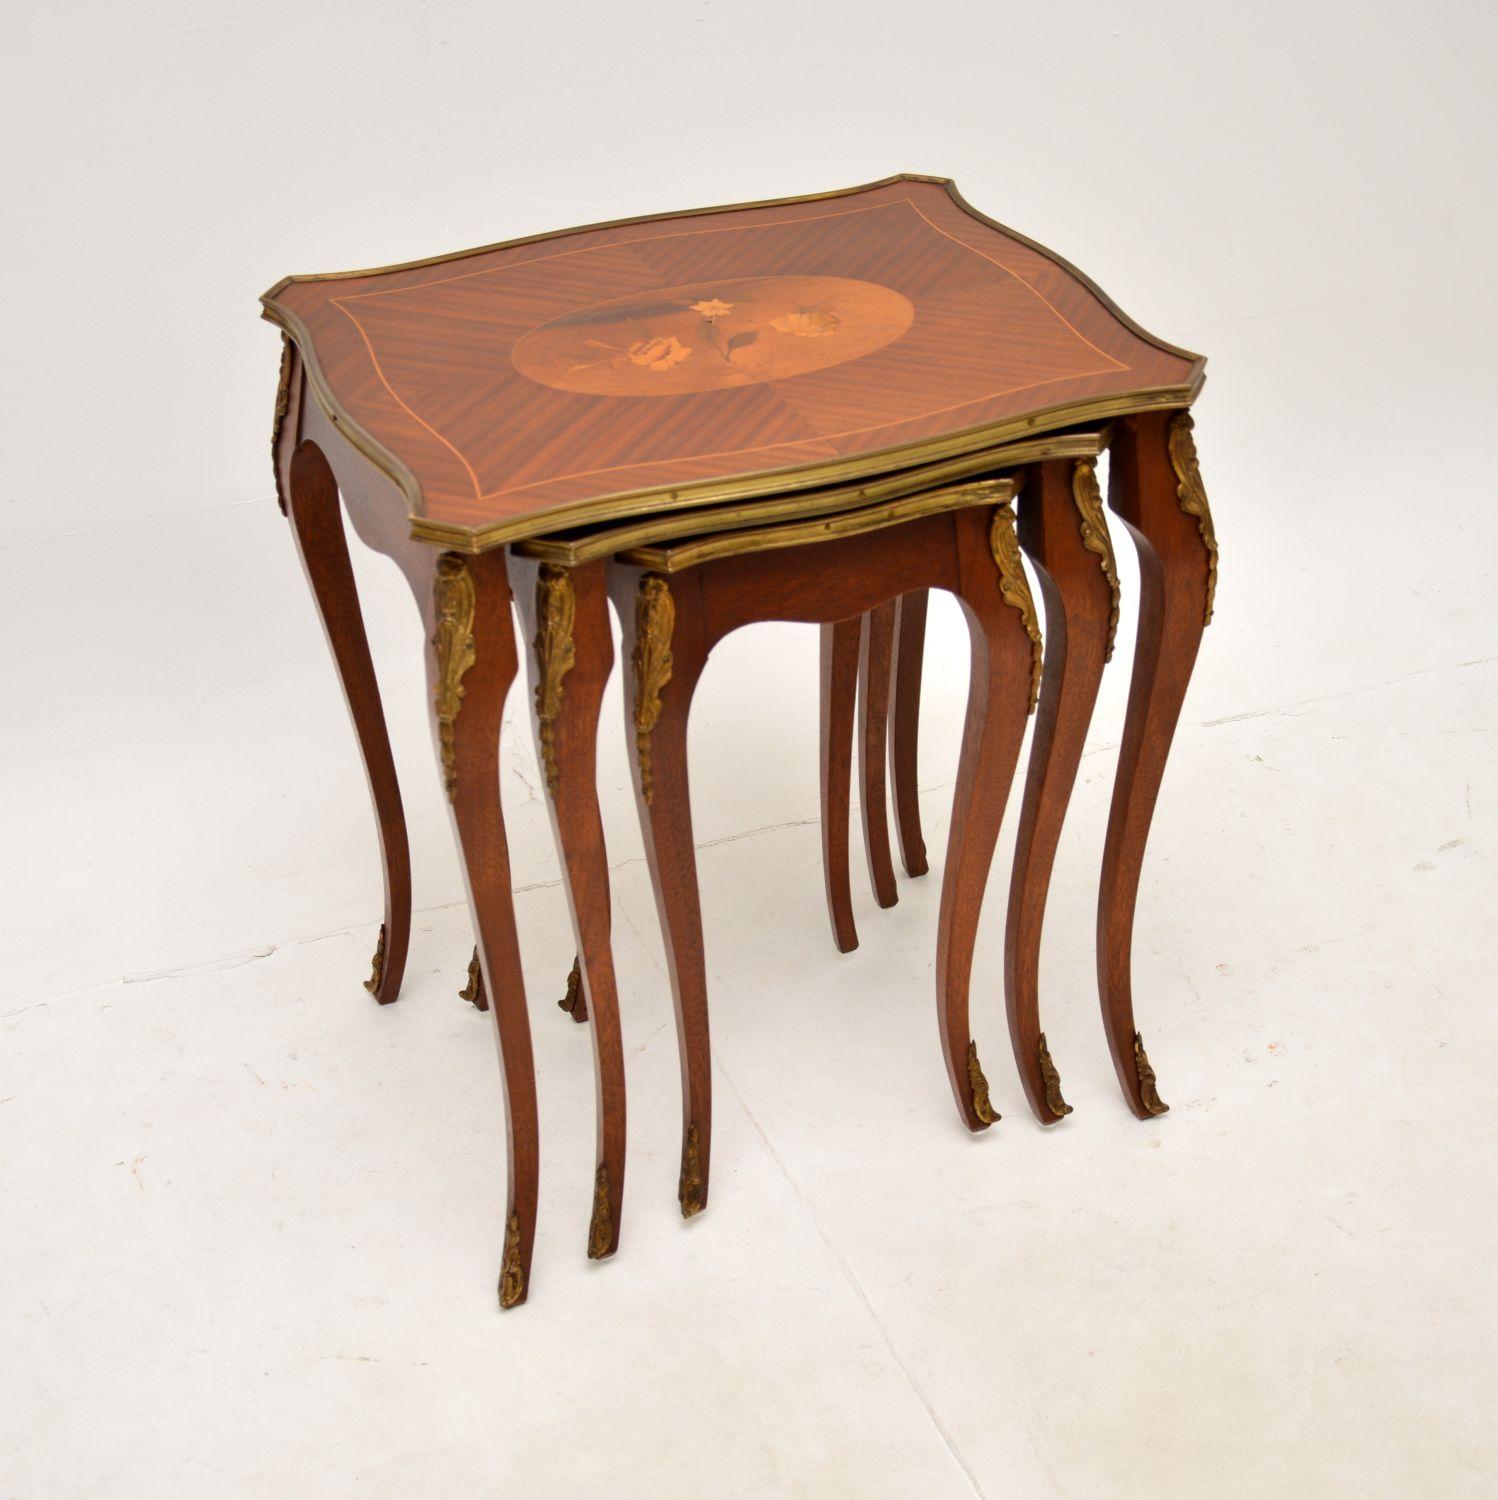 A stunning antique French inlaid nest of tables. This was made in France, it dates from around the 1930’s.

The quality is fantastic, this is beautifully made with gorgeous inlays on the tops, made from various woods. The table tops have brass rims